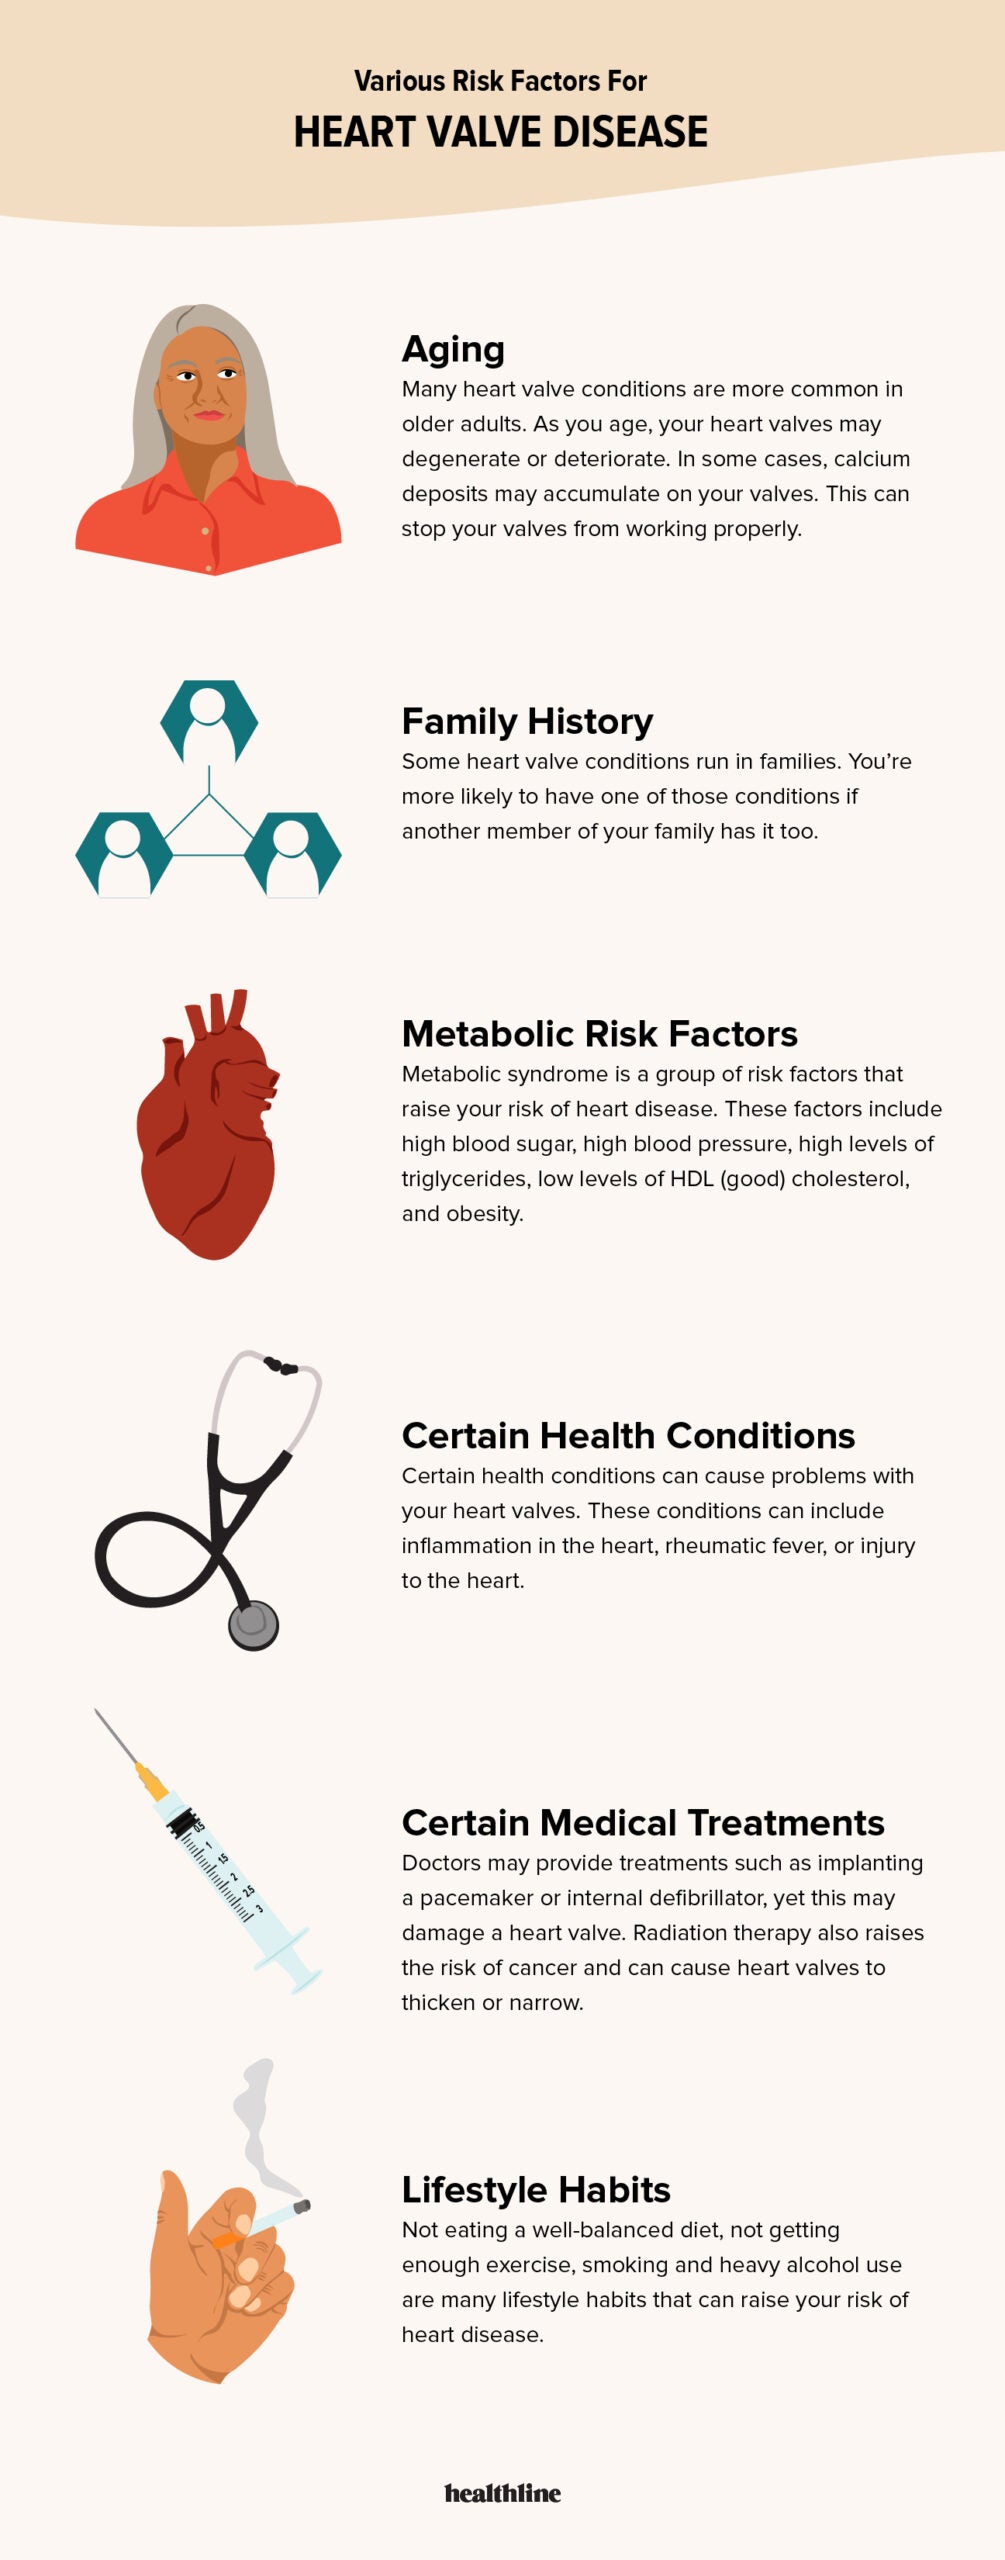 Heart Failure: Symptoms, Treatments, and How to Reduce Your Risk